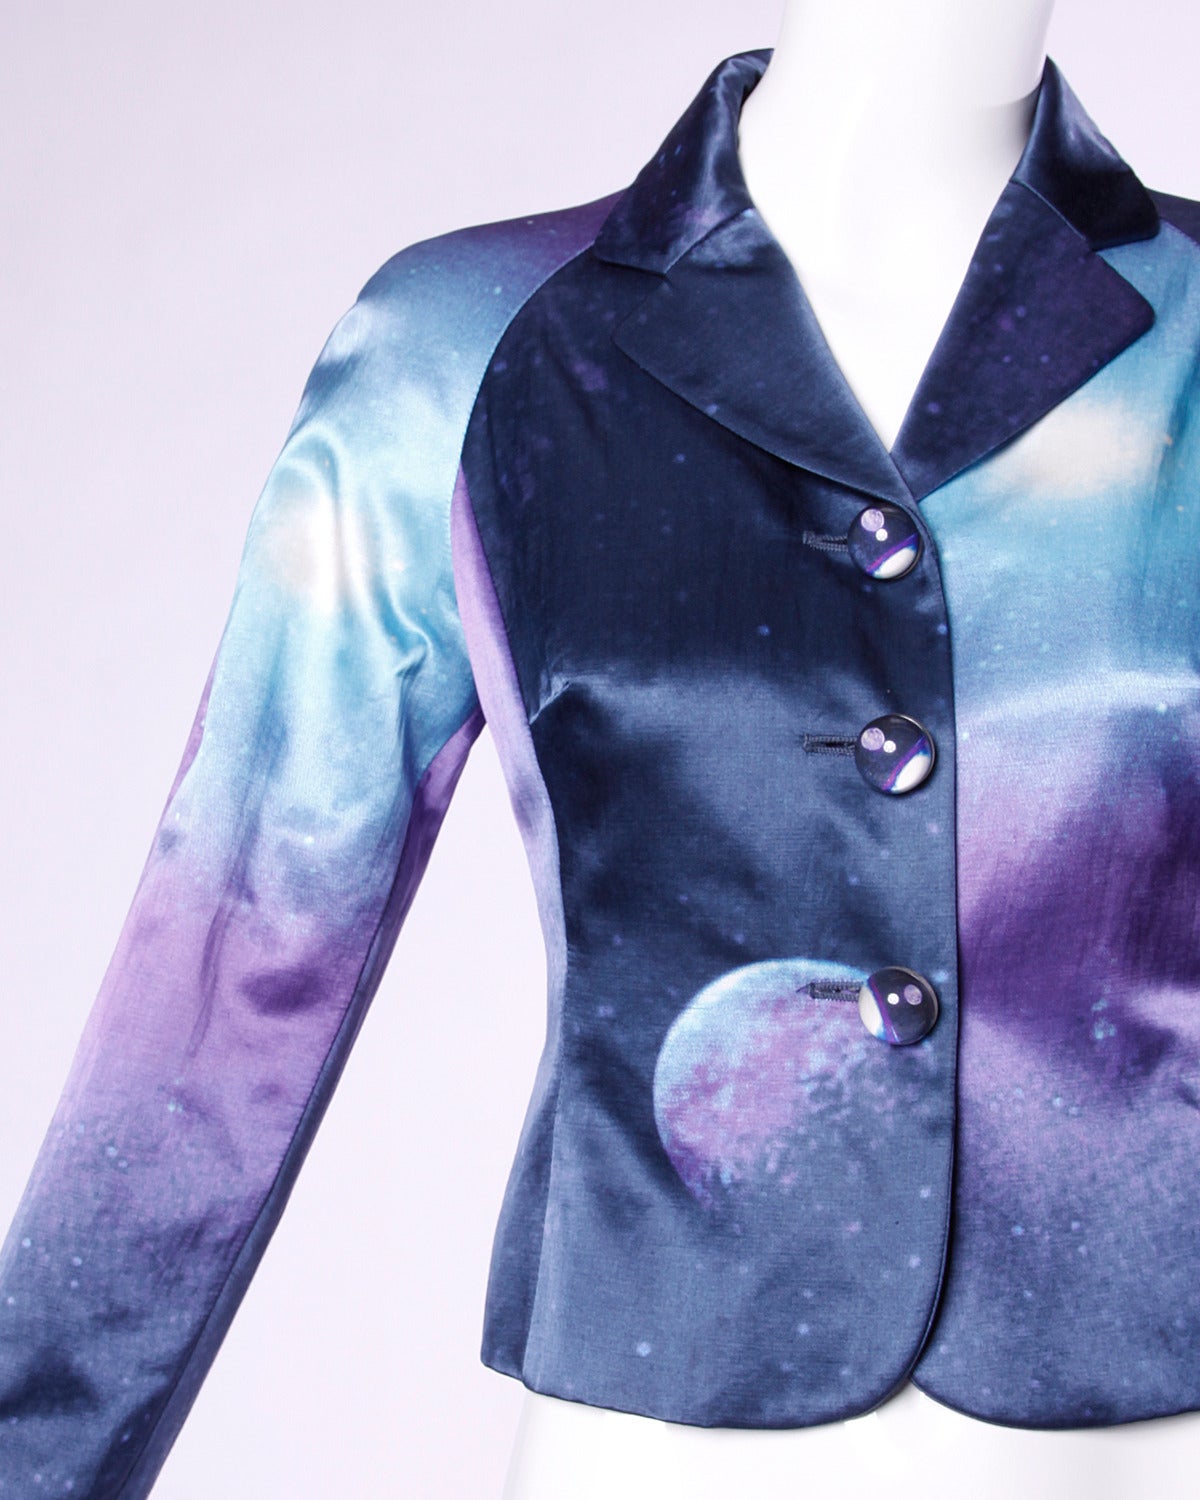 Moschino did it first! Vintage galaxy print jacket in cool tones of blue and purple featuring clear oversized buttons with a moonscape inside. A rare and highly collectible piece!

Details:

Fully Lined
Front Button Closure
Marked Size: I 42/